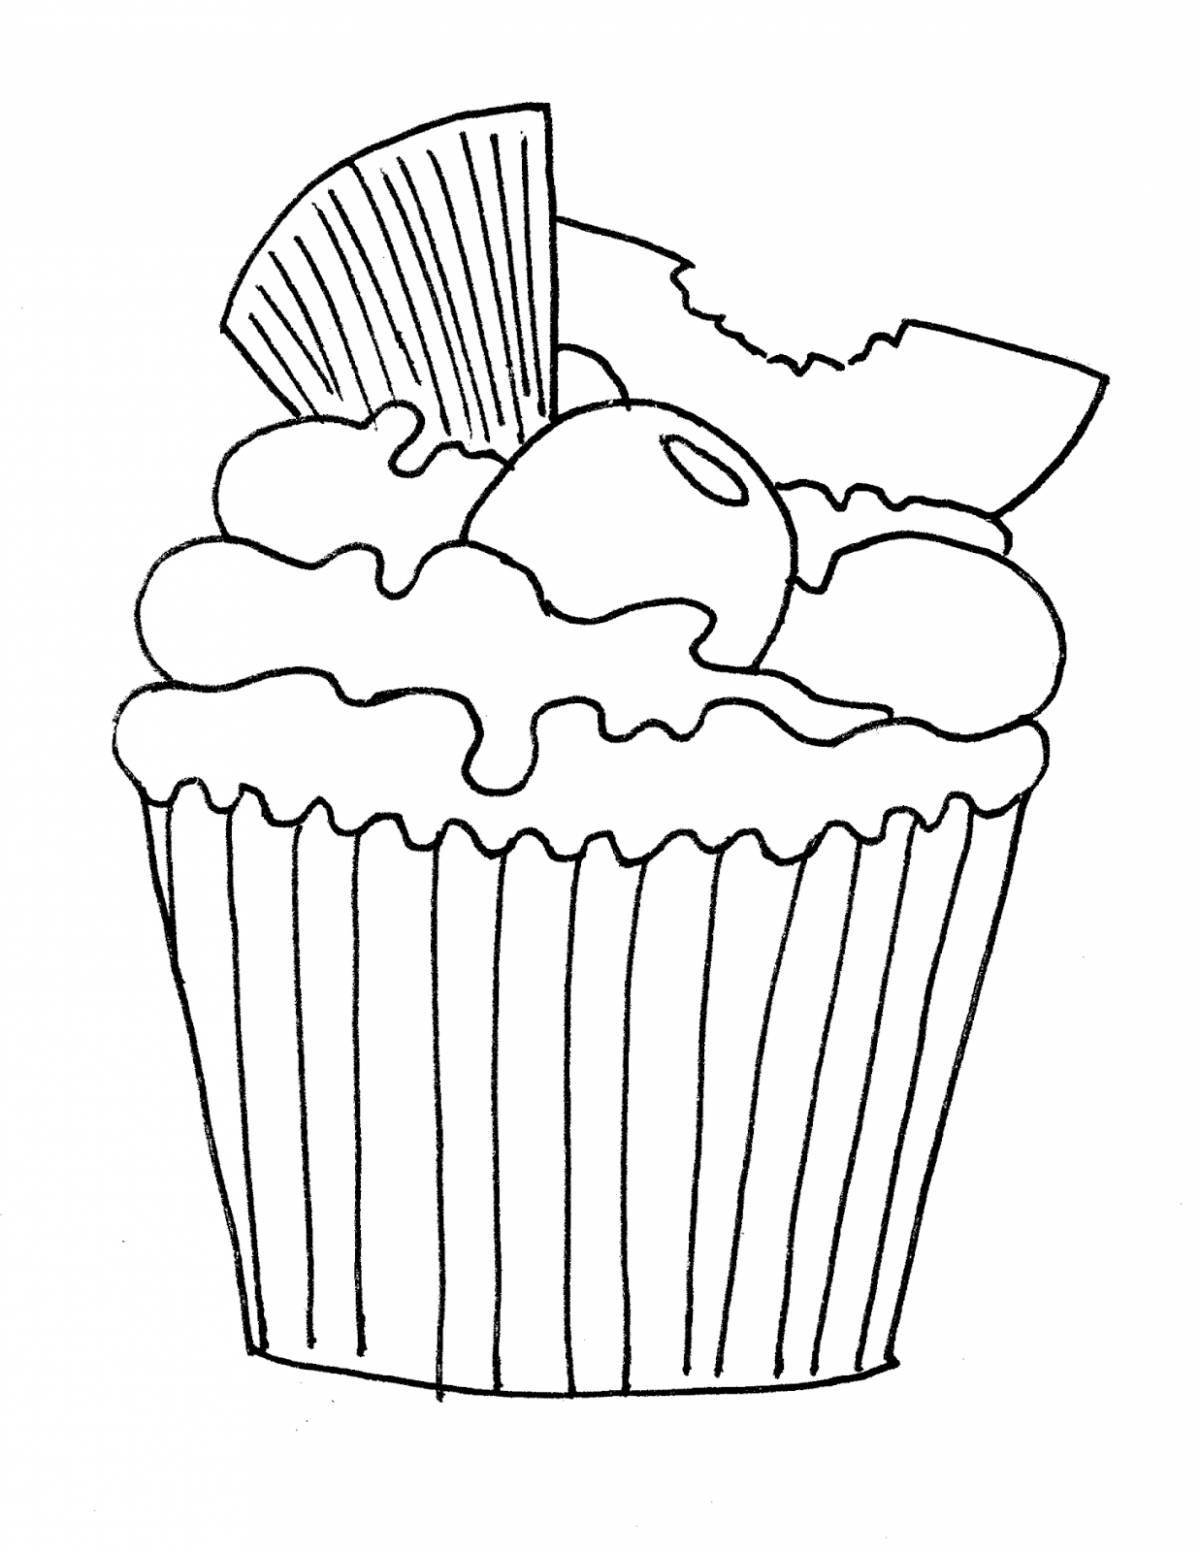 Glitter cake coloring book for kids